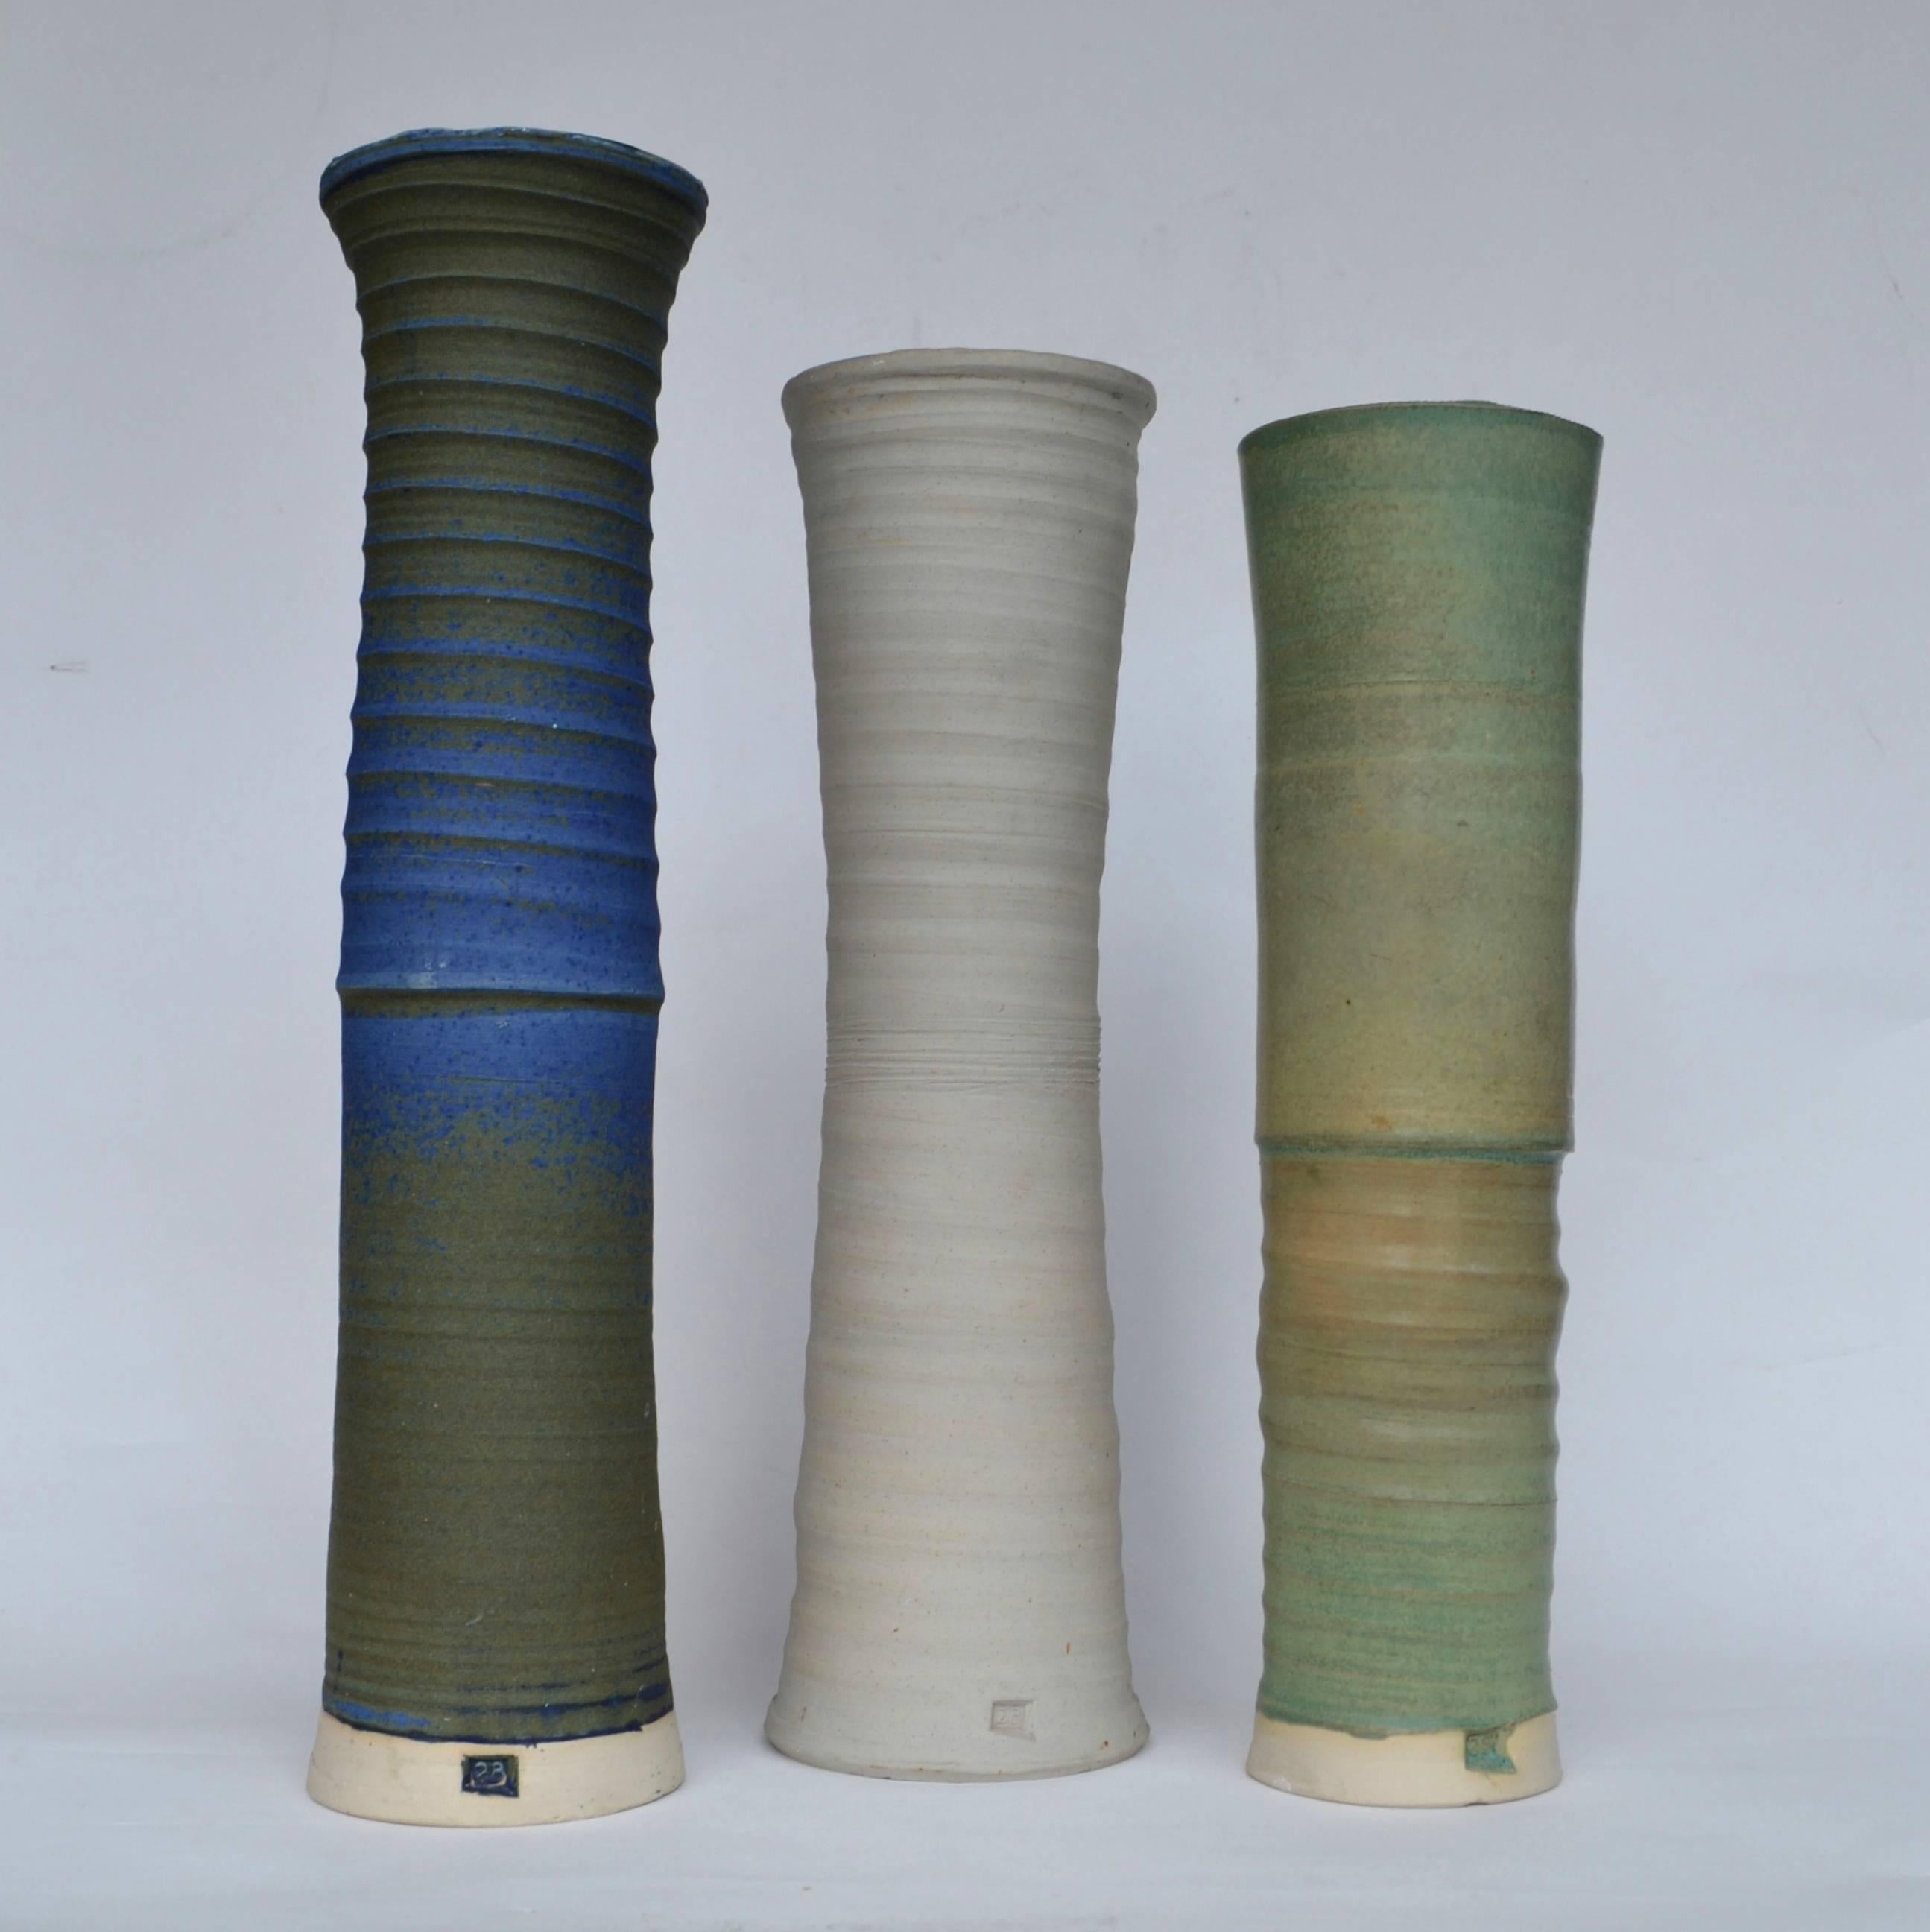 Elongated vases or vessels in muted tones of blue, green and sand color by the UK ceramist Virginia Rood Pane.
They have slightly different heights (49, 44, 42 cm) and shapes and the textures show the hand movement of the throwing process of each